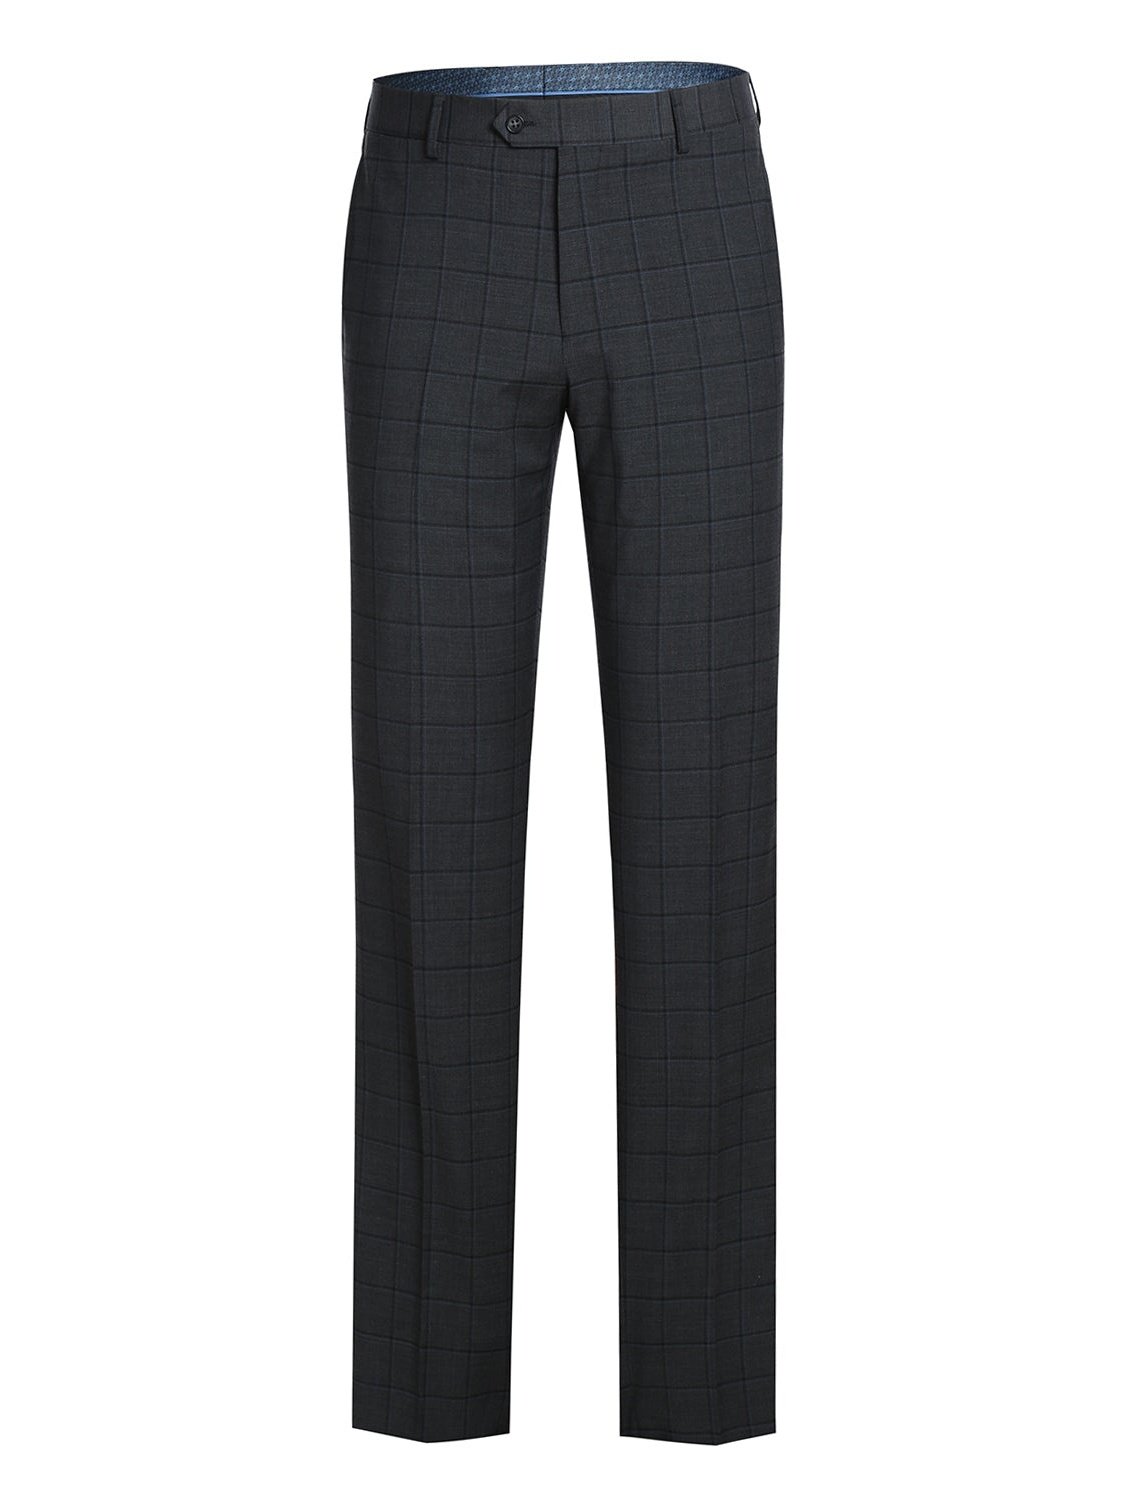 English Laundry Slim Fit Charcoal Checked Wool Suit